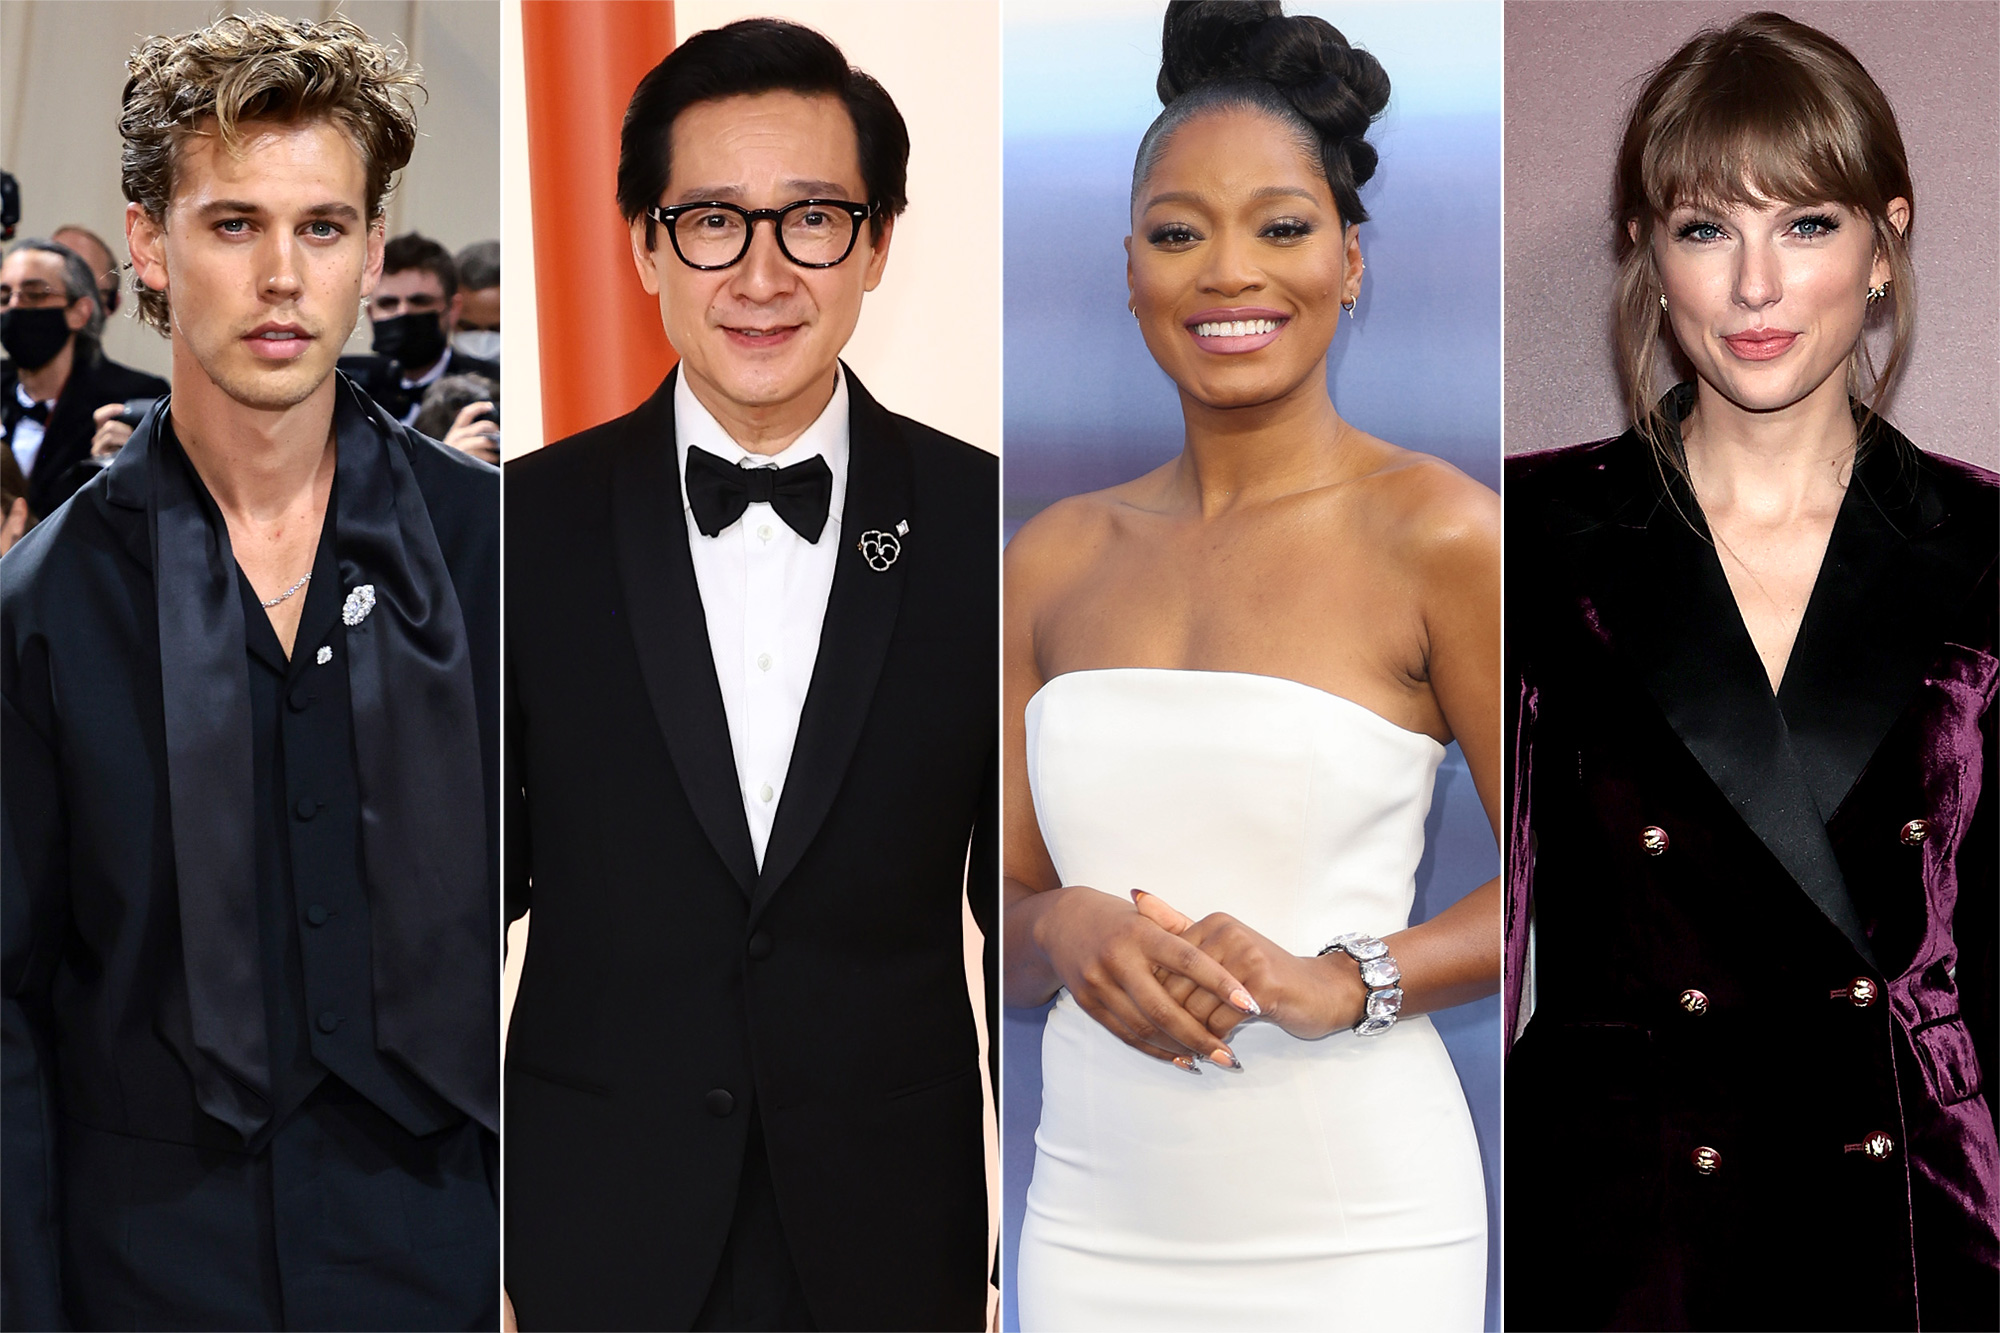 Austin Butler, Ke Huy Quan, Keke Palmer, and Taylor Swift have been invited to join the Academy of Motion Picture Arts and Sciences